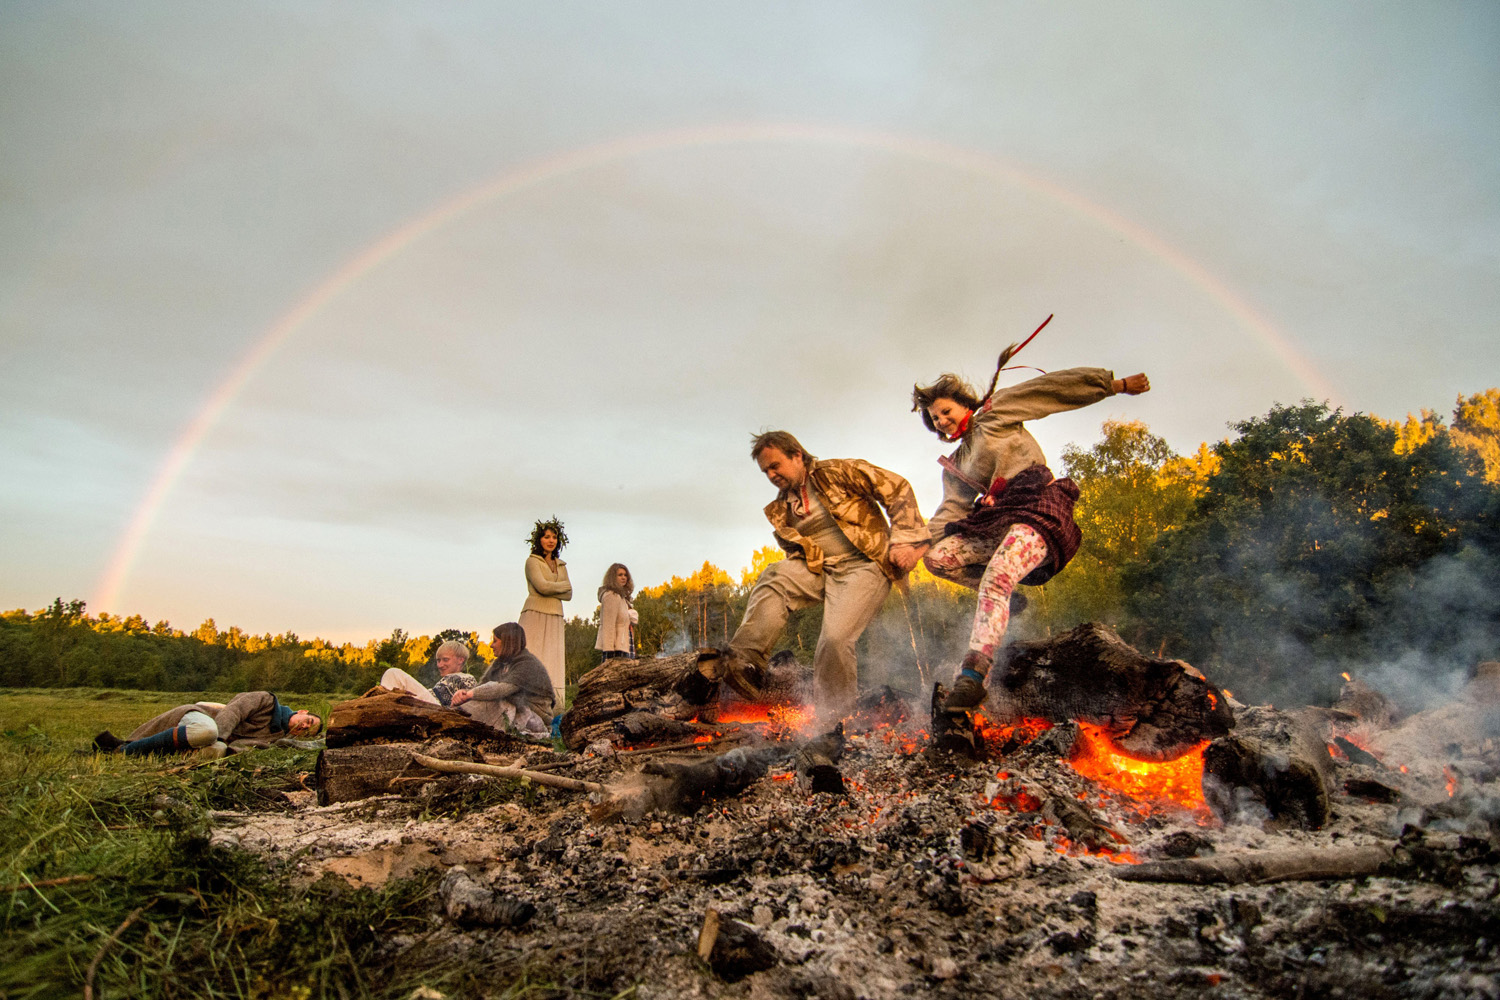 Men and women celebrate Ivan Kupala night, an ancient heathen holiday, in the countryside near a village in the Kulneva some 280 km north of Minsk, Belarus late on June 22, 2014.